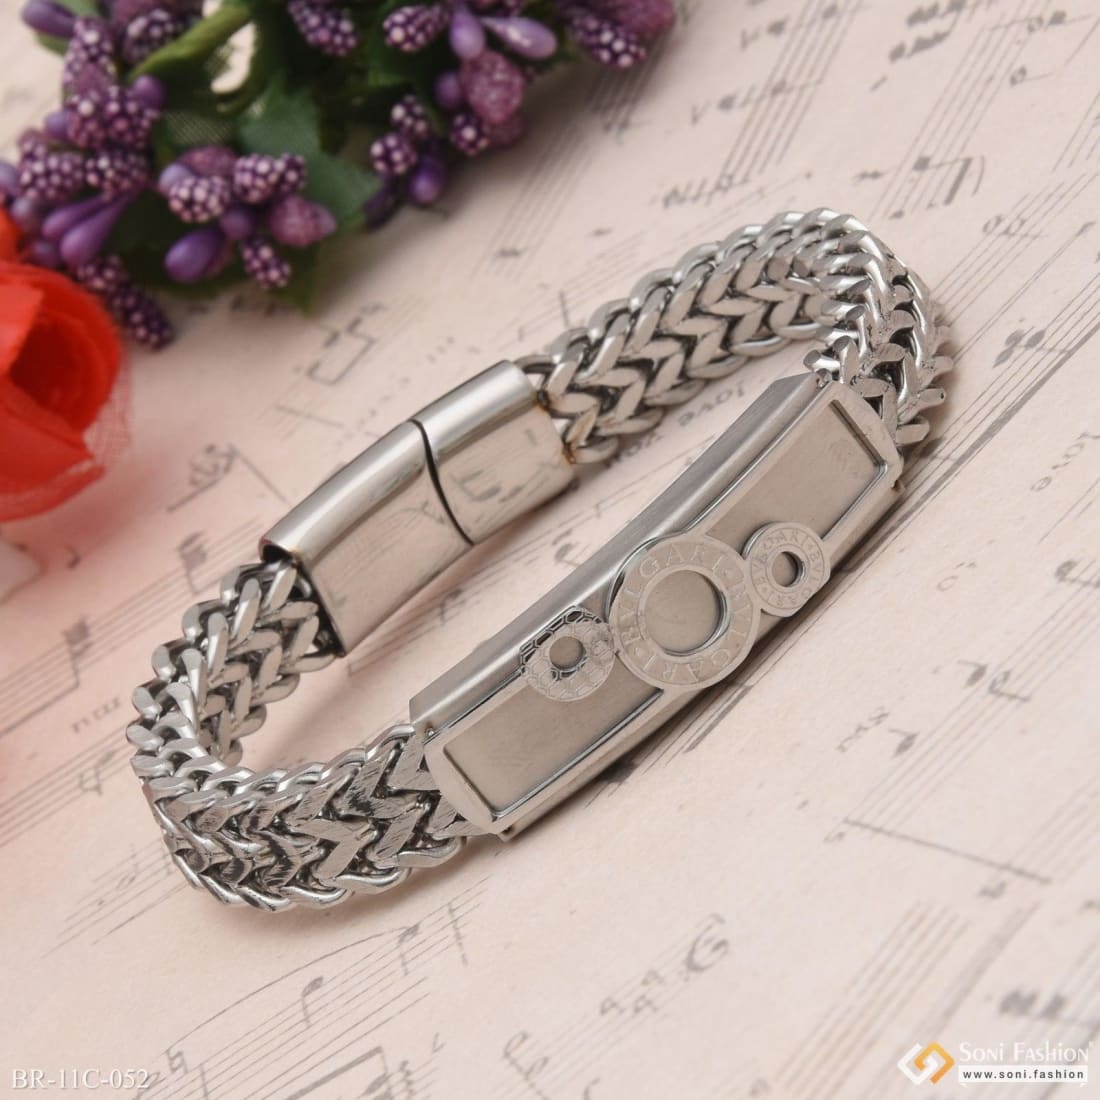 Real Solid 925 Sterling Silver Bracelet Vajra Lection Braided Clasp 7.1